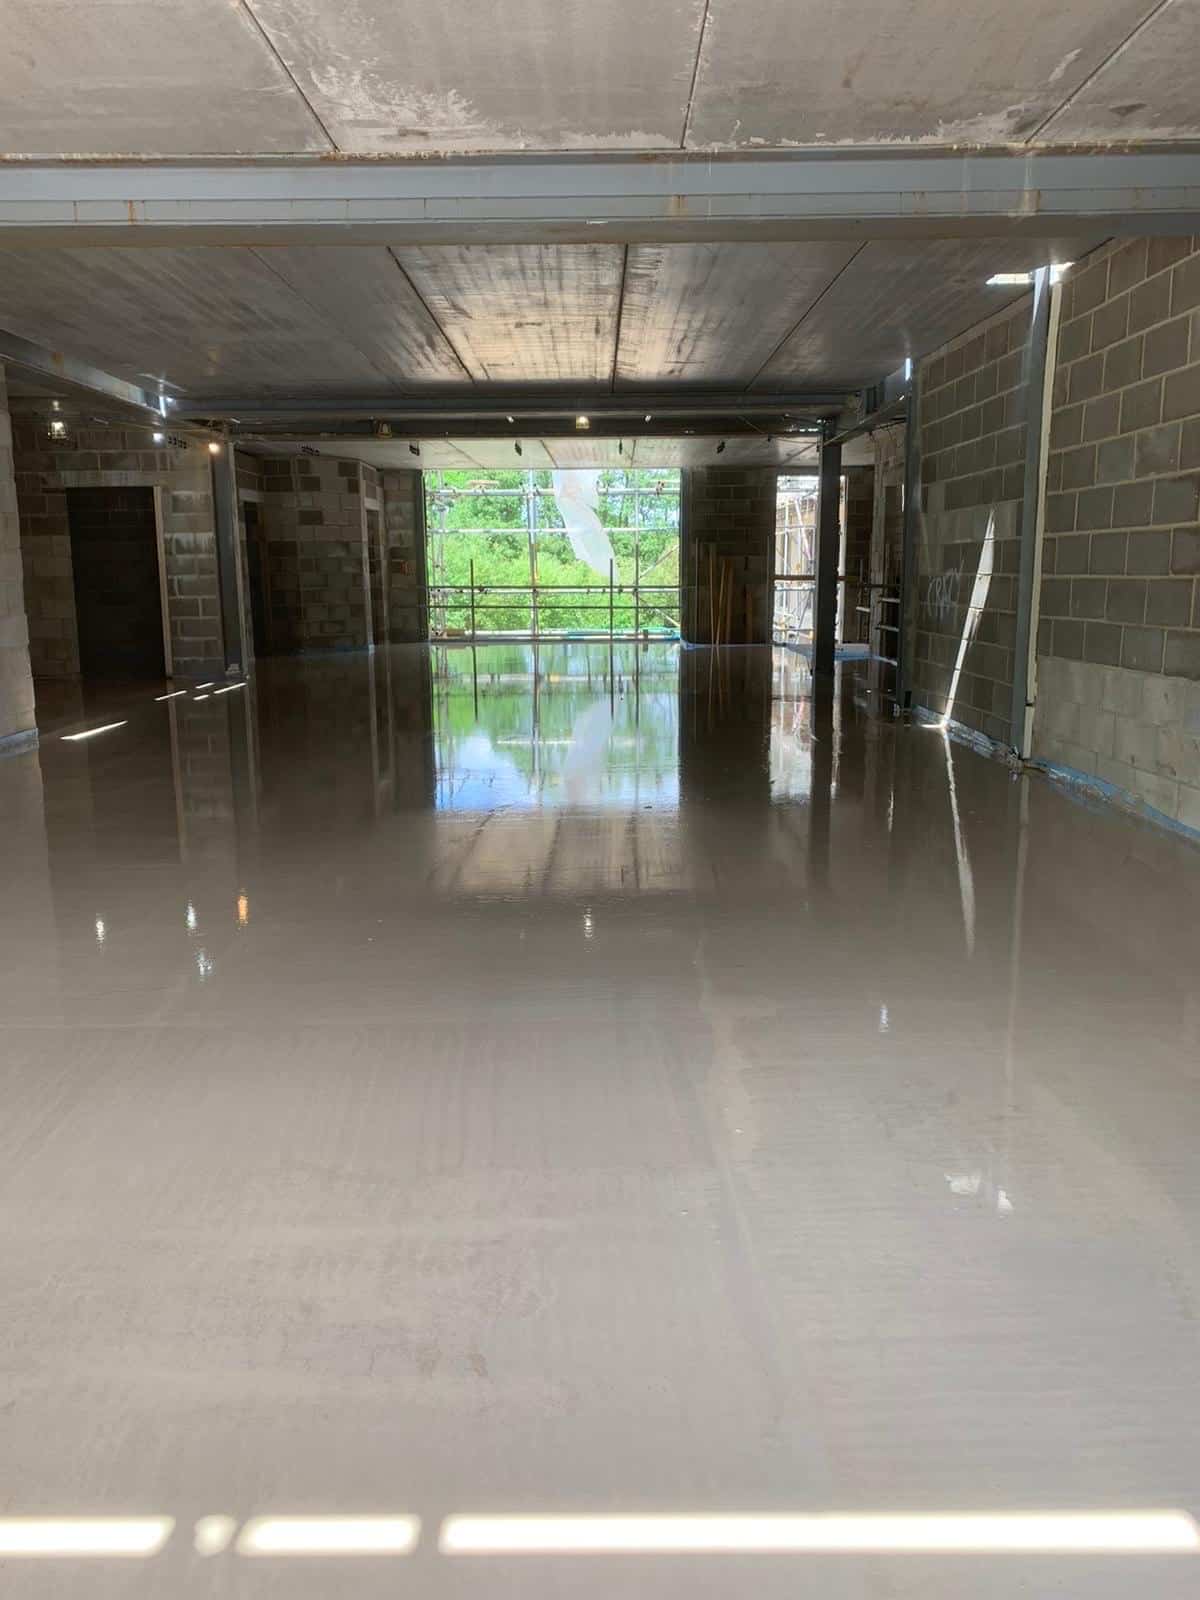 completed Liquid Screed Floor- drying process